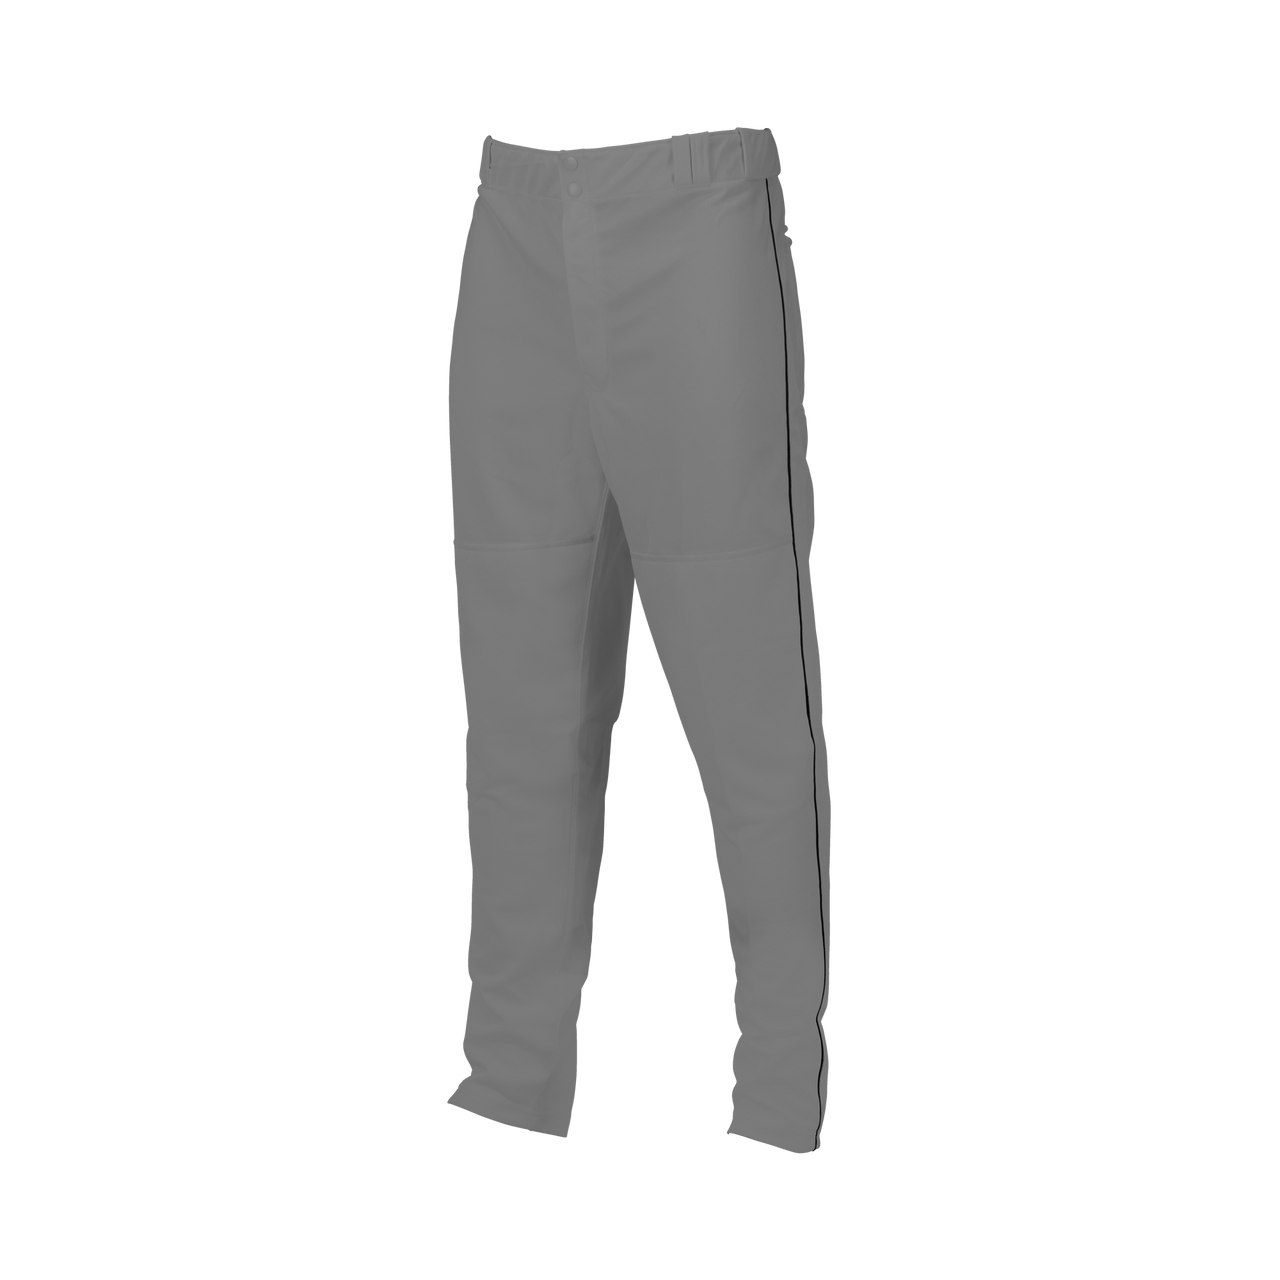 Marucci Youth Piped Double-Knit Pants Gray/Black Small